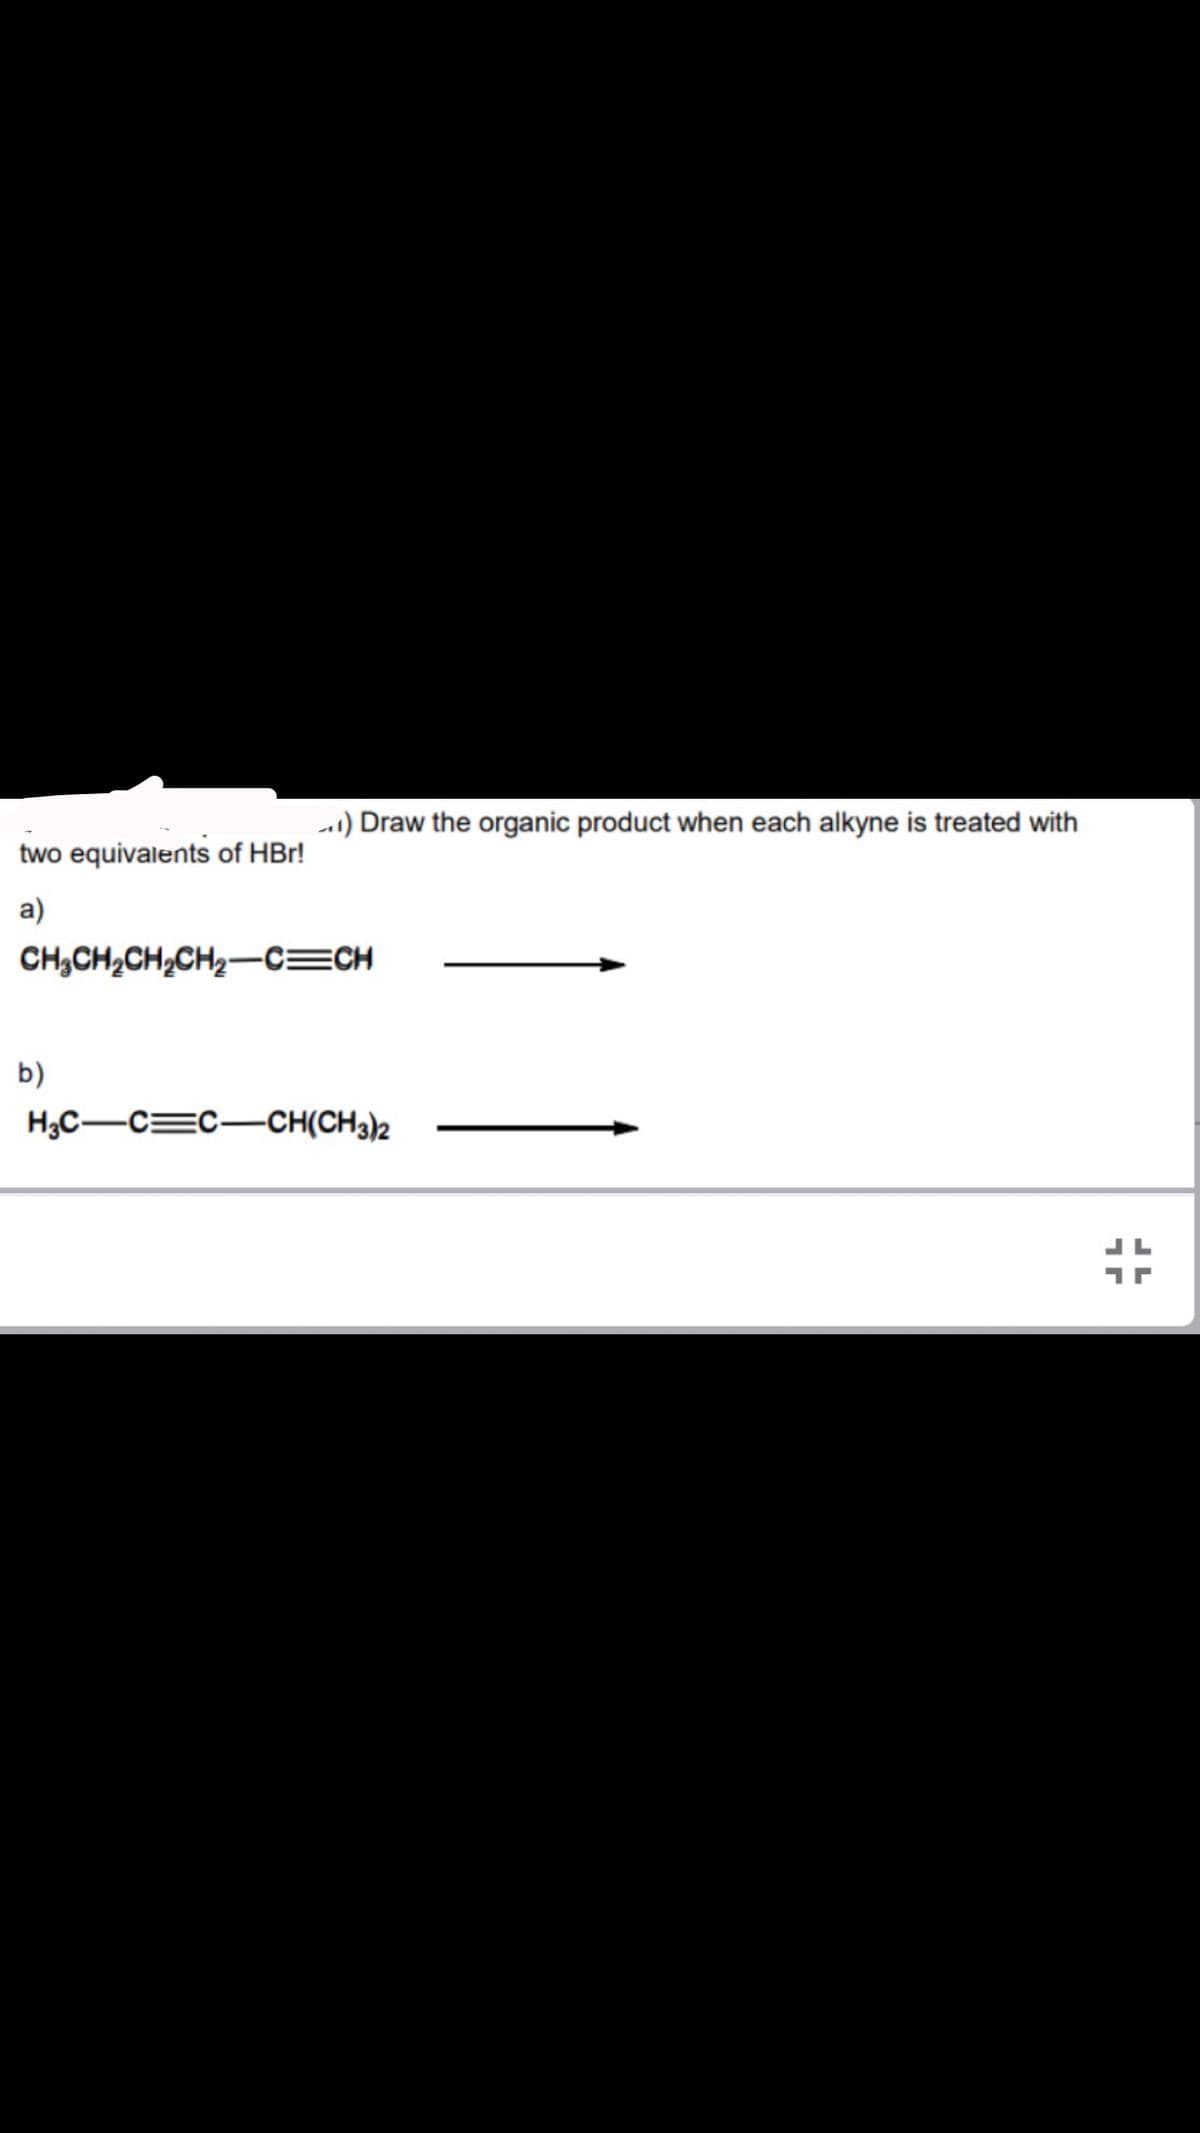 two equivalents of HBr!
a)
) Draw the organic product when each alkyne is treated with
CH₂CH₂CH₂CH₂-C=CH
b)
H3C-C=C-CH(CH3)2
1
JL